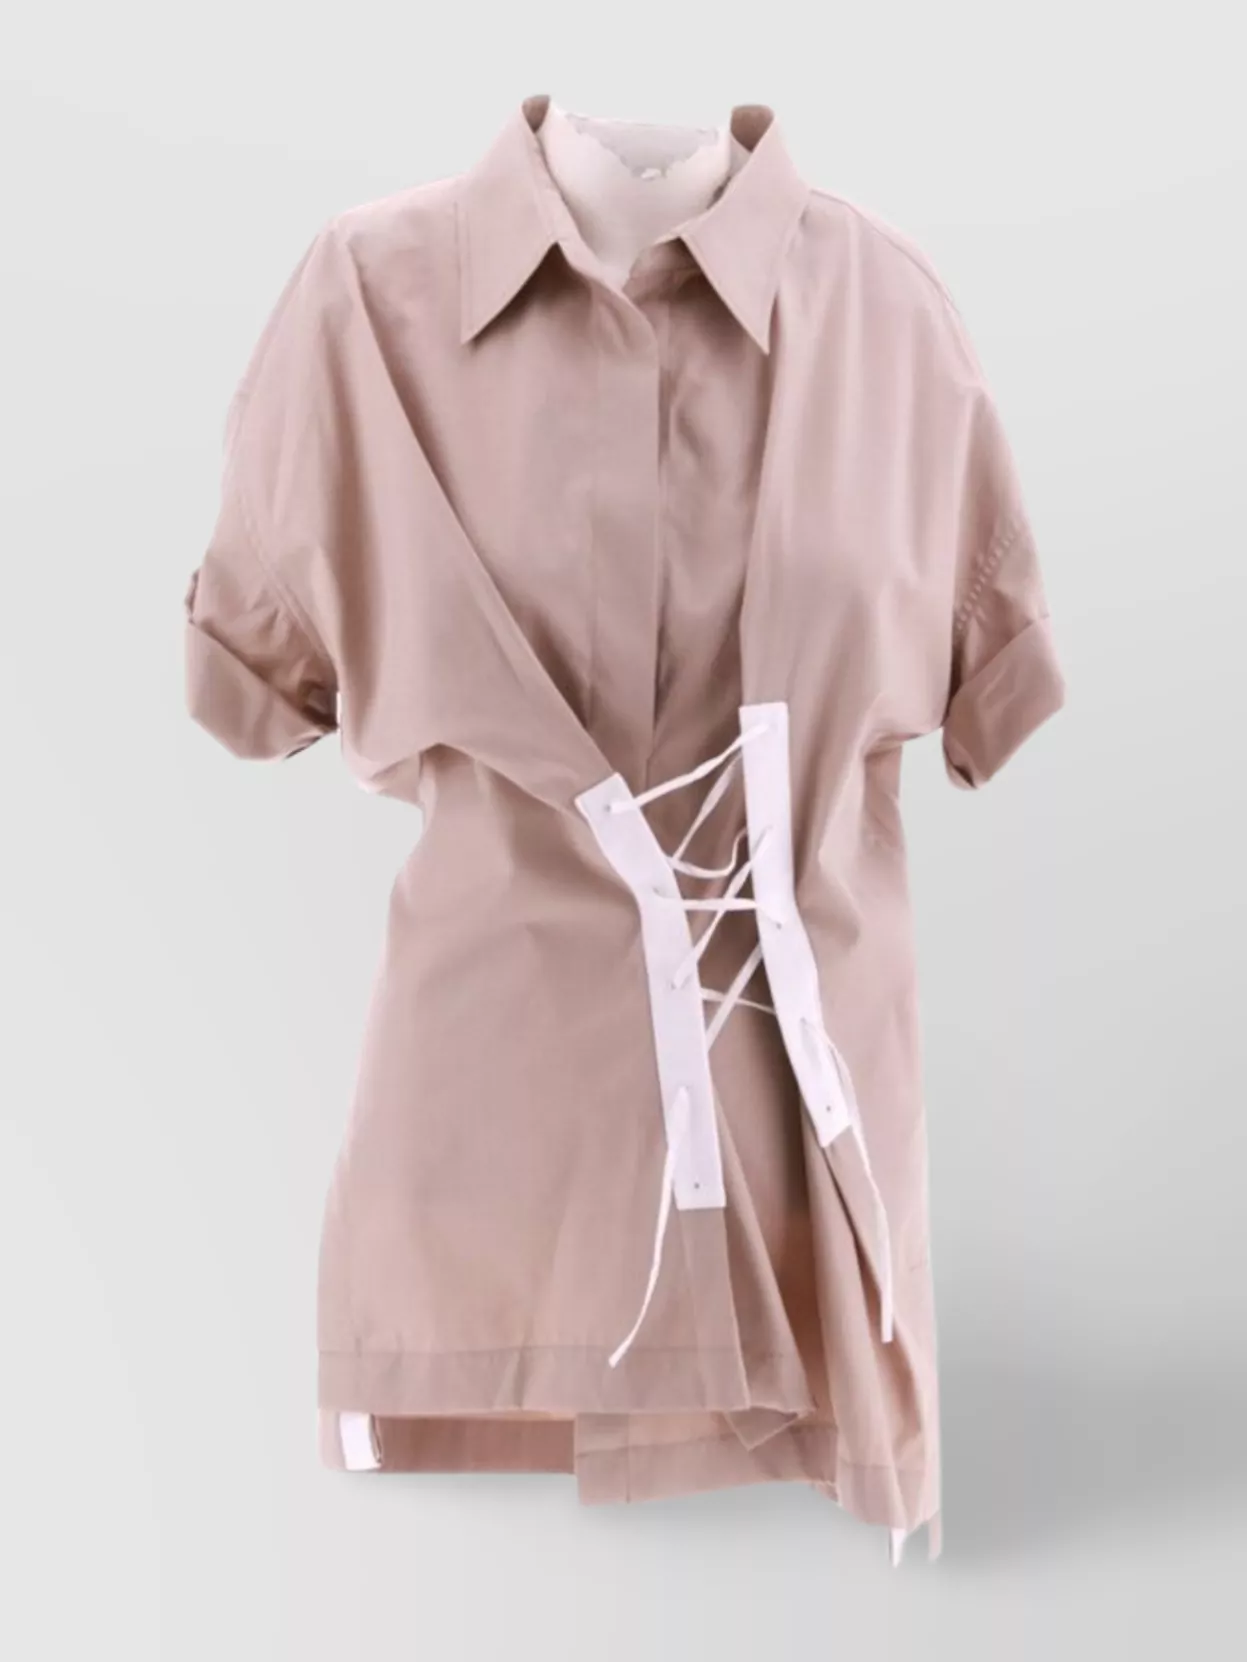 Dries Van Noten Lace-up Short Sleeve Shirt With Side Slits In Pink